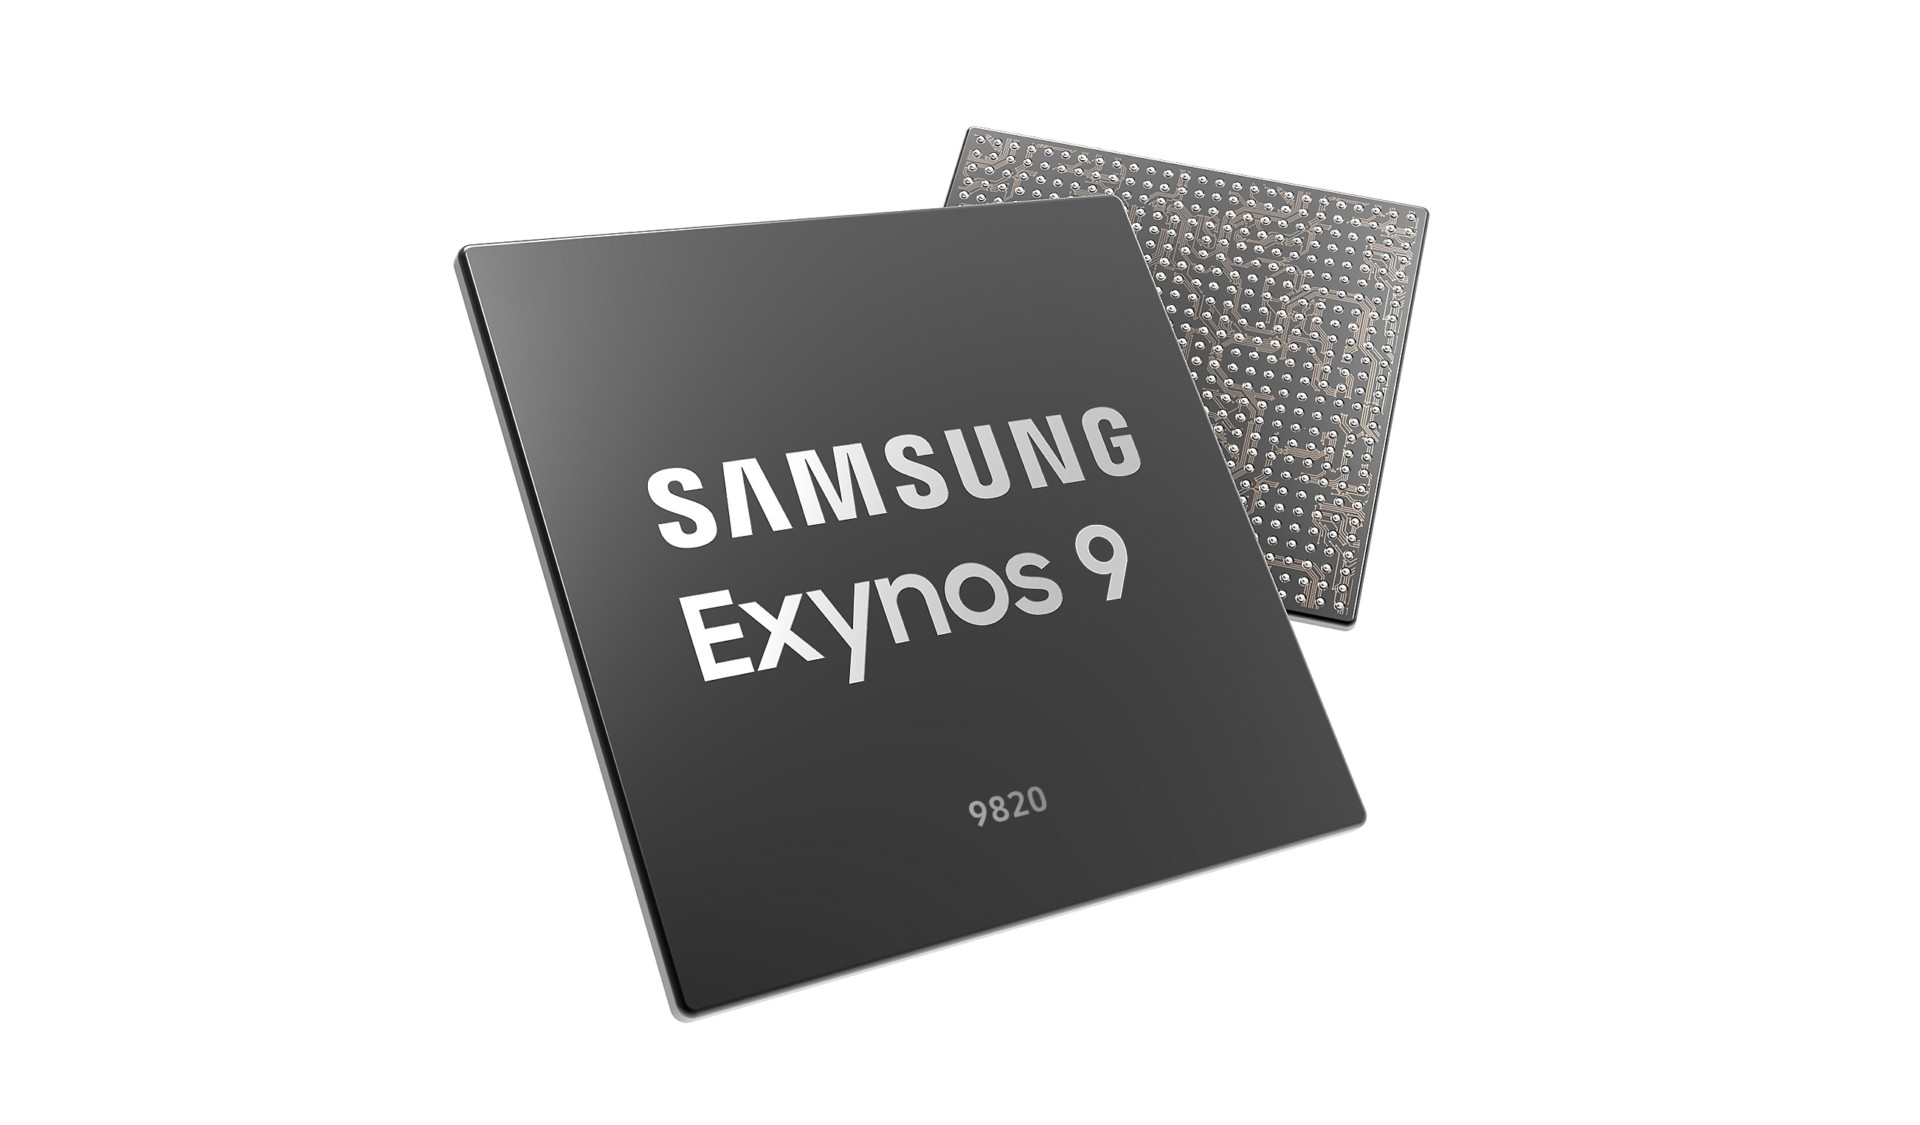 The high-end Samsung Exynos processors used custom CPU cores.